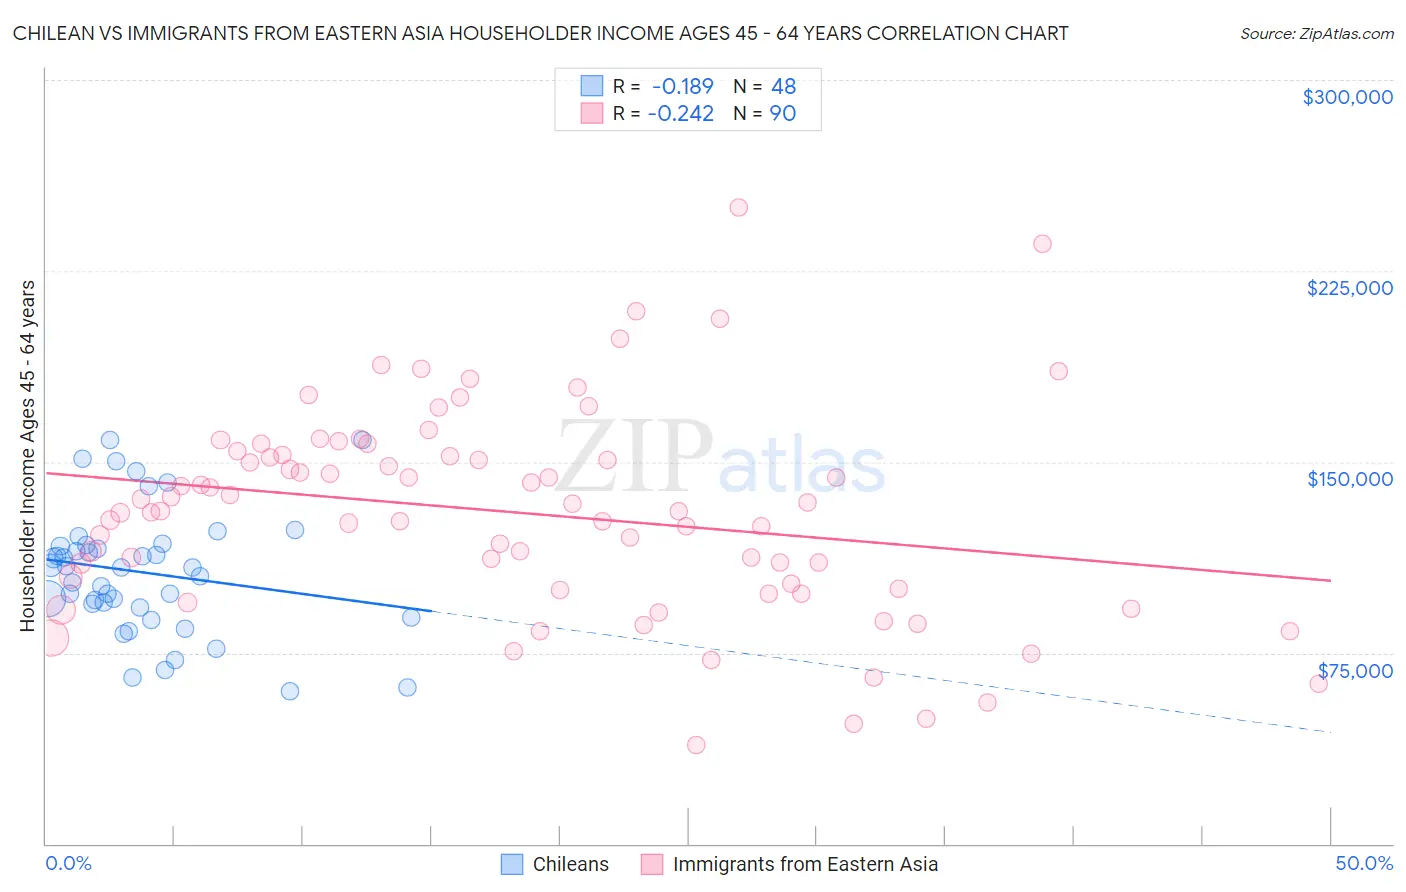 Chilean vs Immigrants from Eastern Asia Householder Income Ages 45 - 64 years